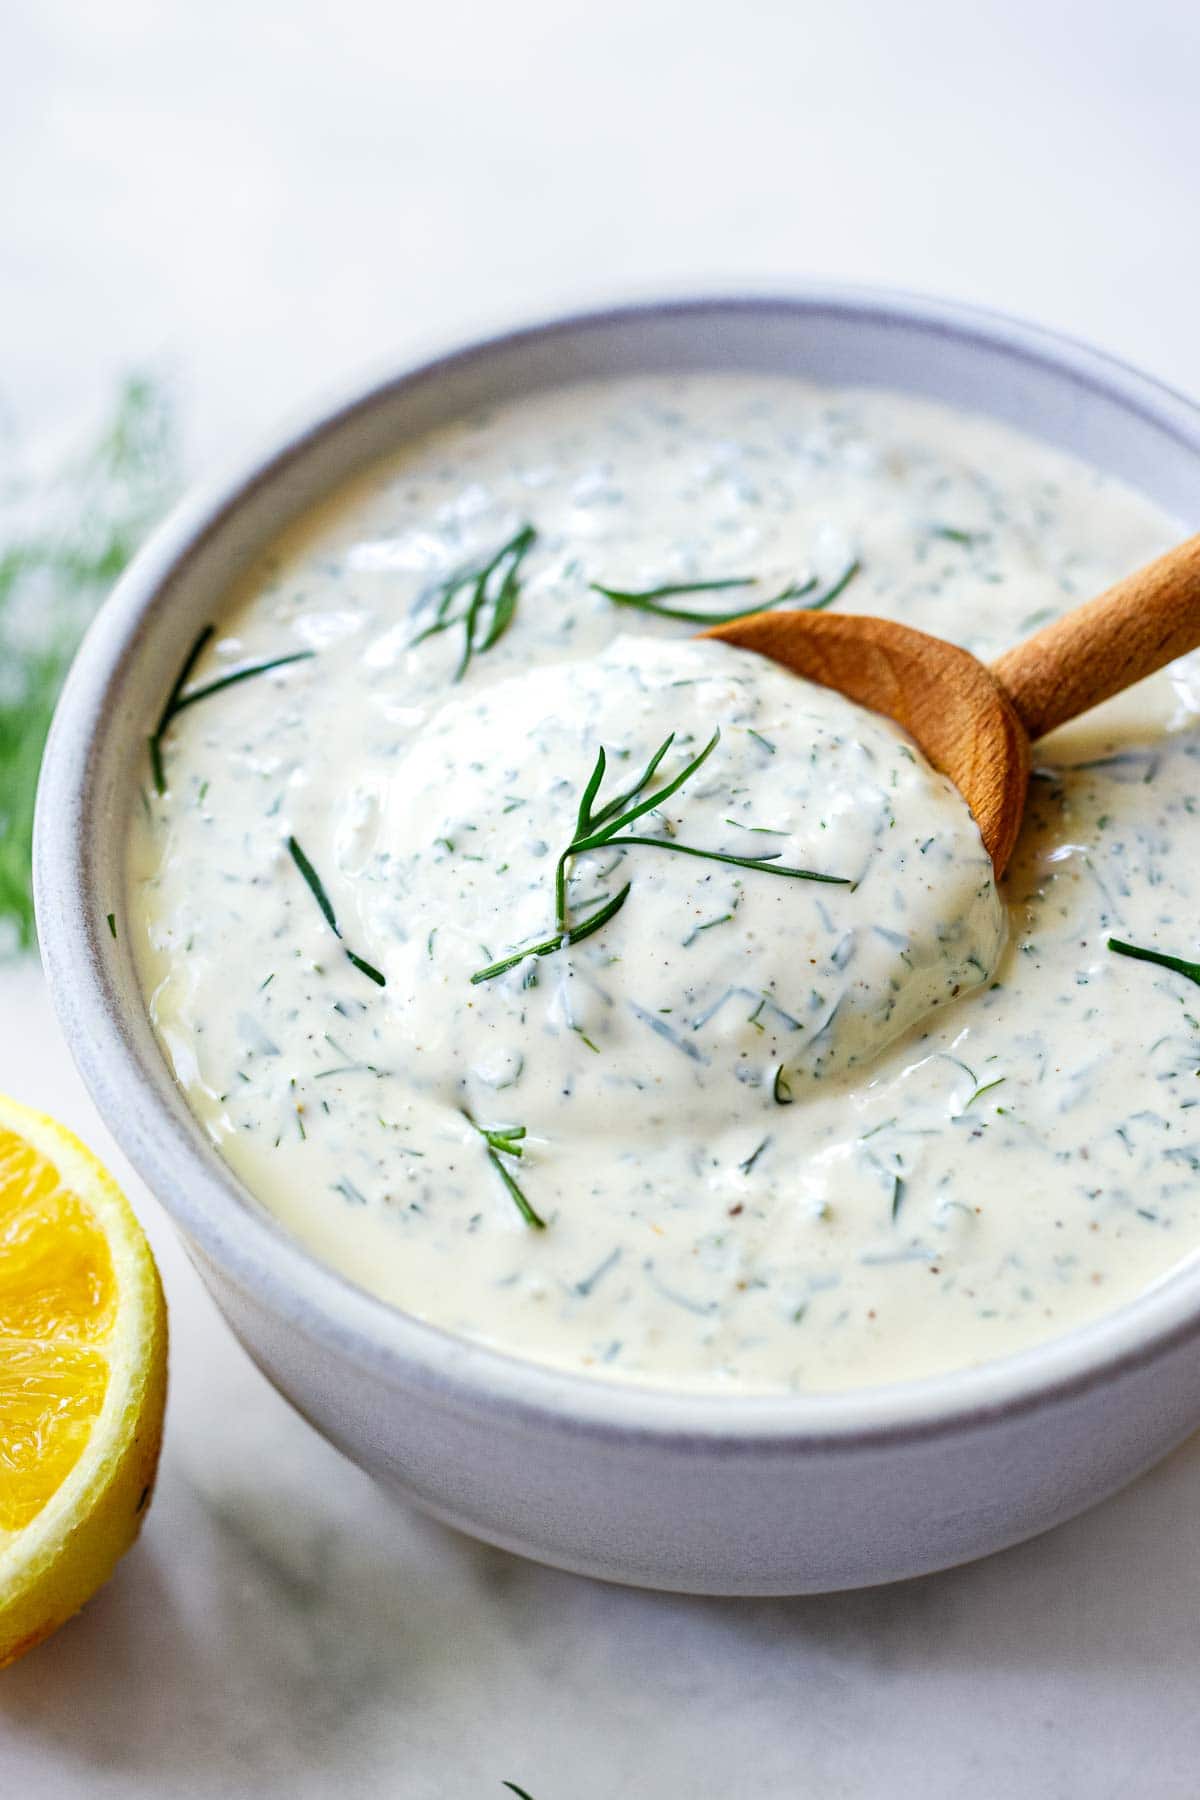 This luscious creamy Dill Sauce is fresh and flavorful- perfect for salmon, veggies, or use it as a dip. It's made with simple ingredients in under five minutes!